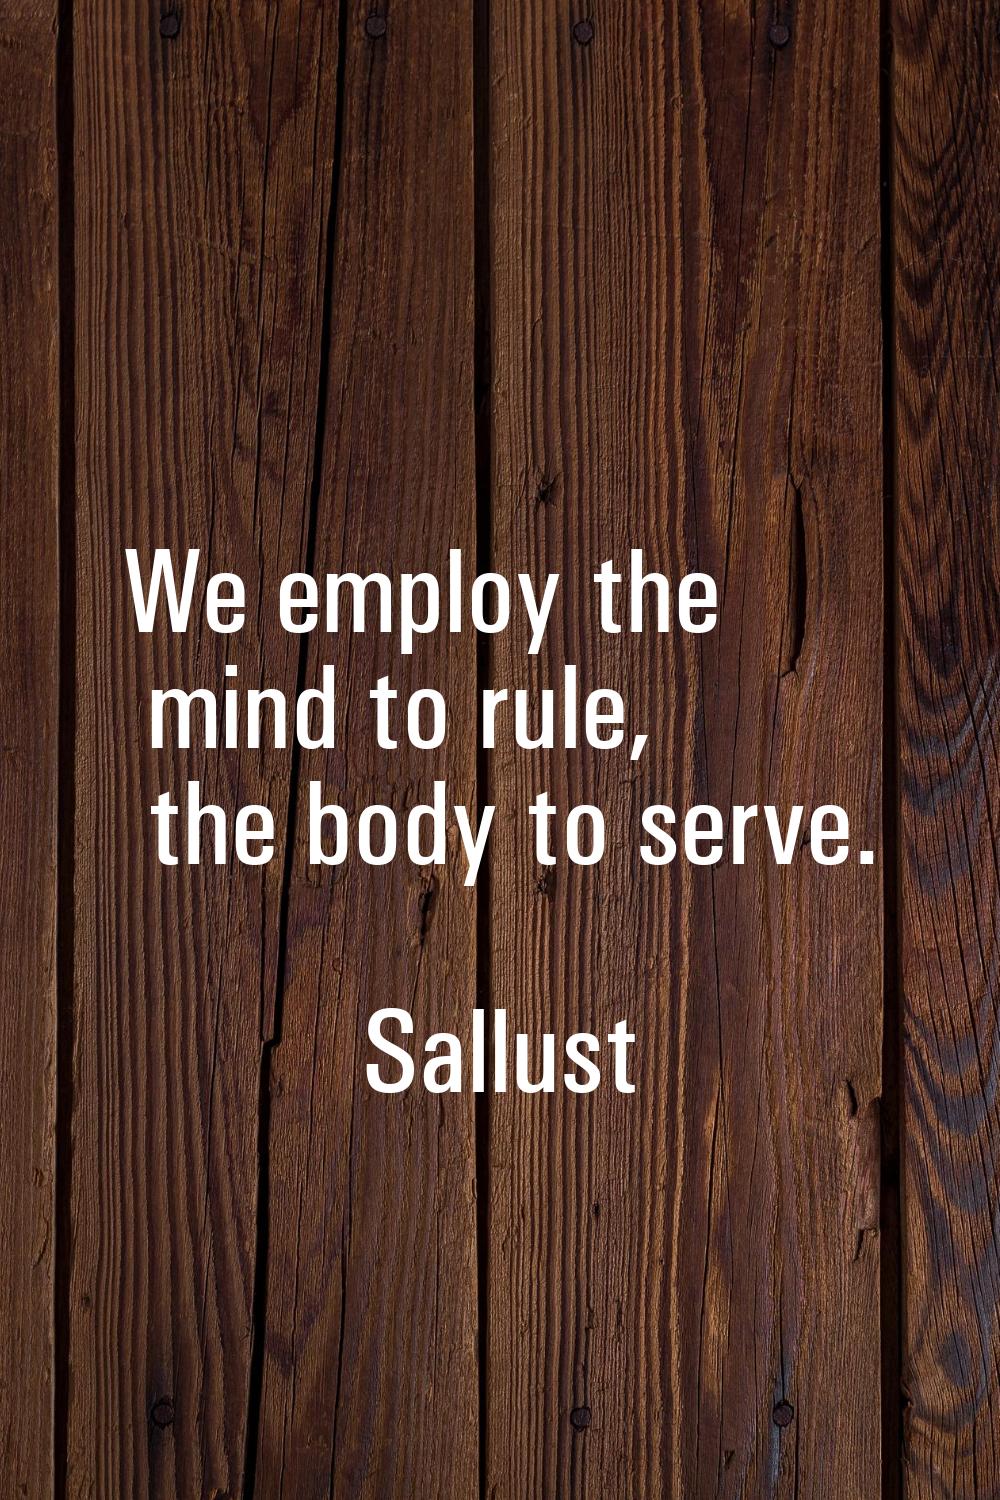 We employ the mind to rule, the body to serve.